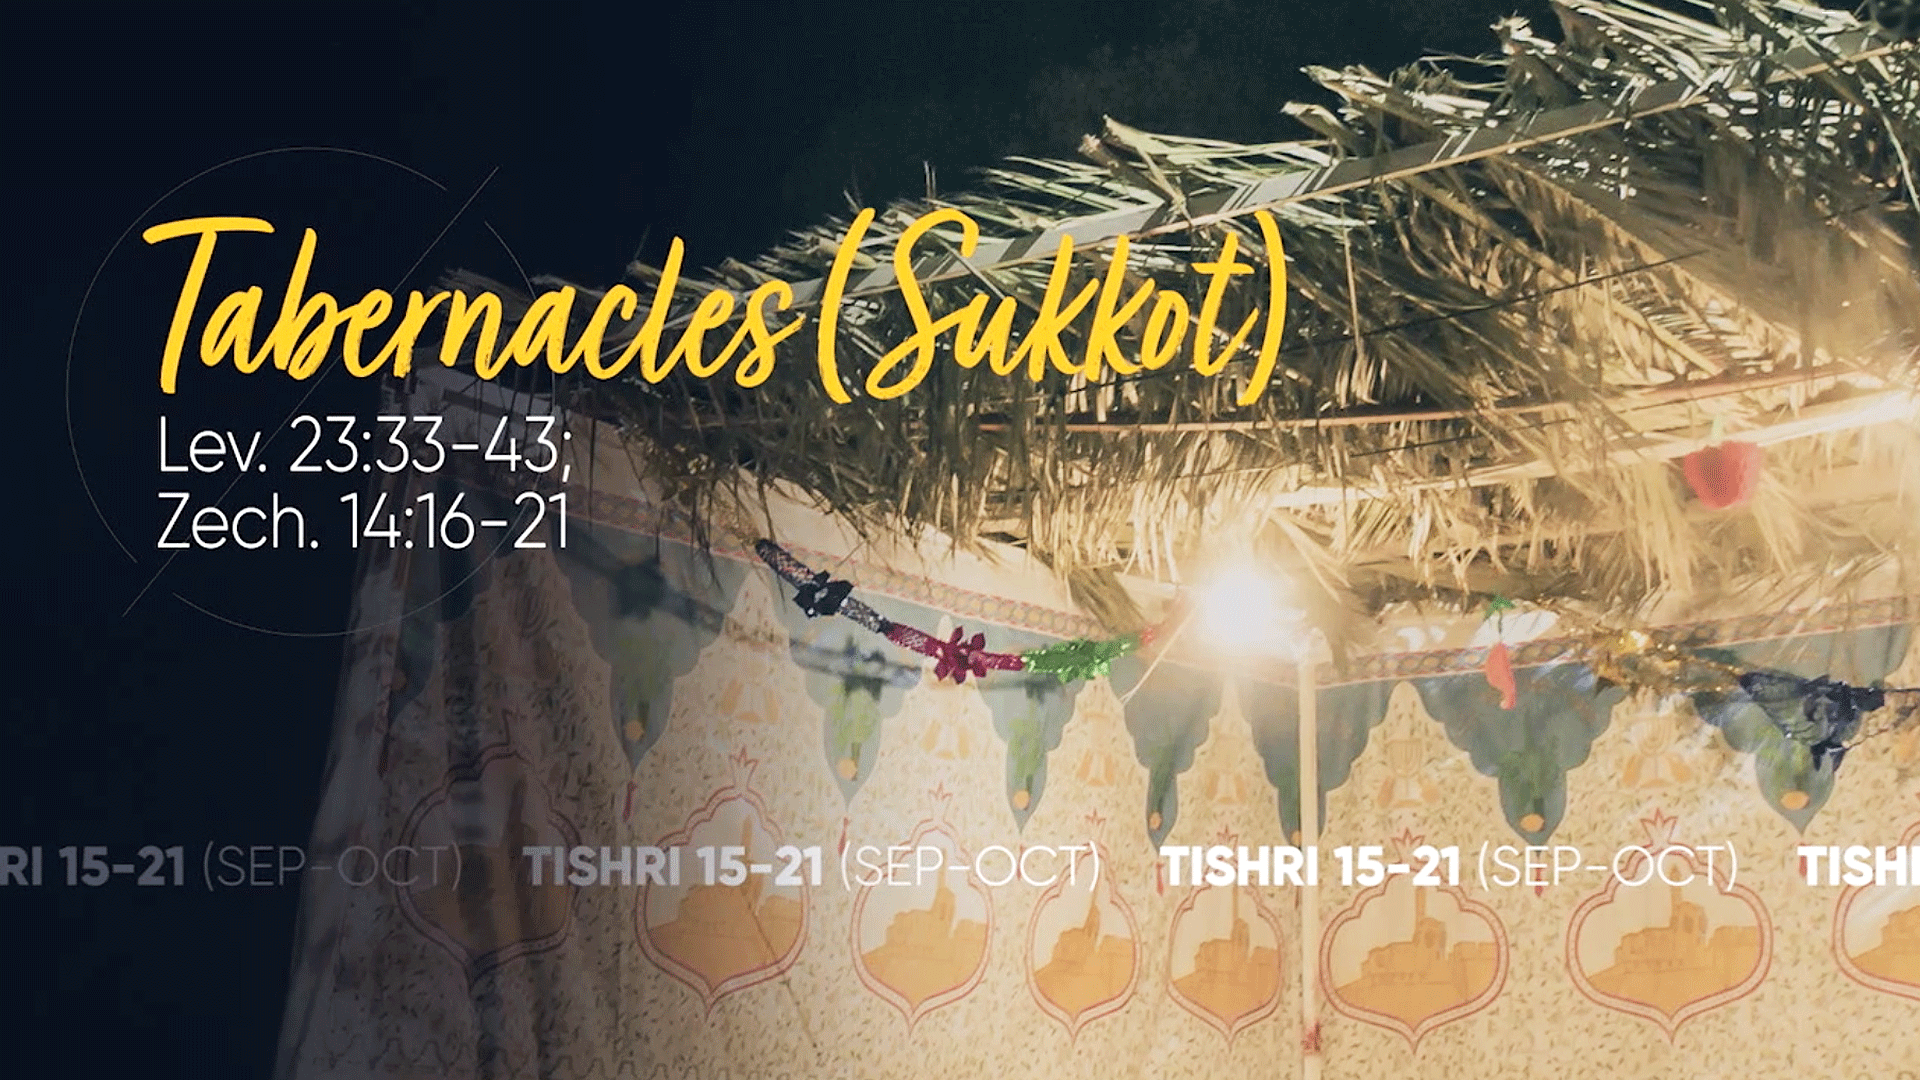 The Jewish Feast of Tabernacles